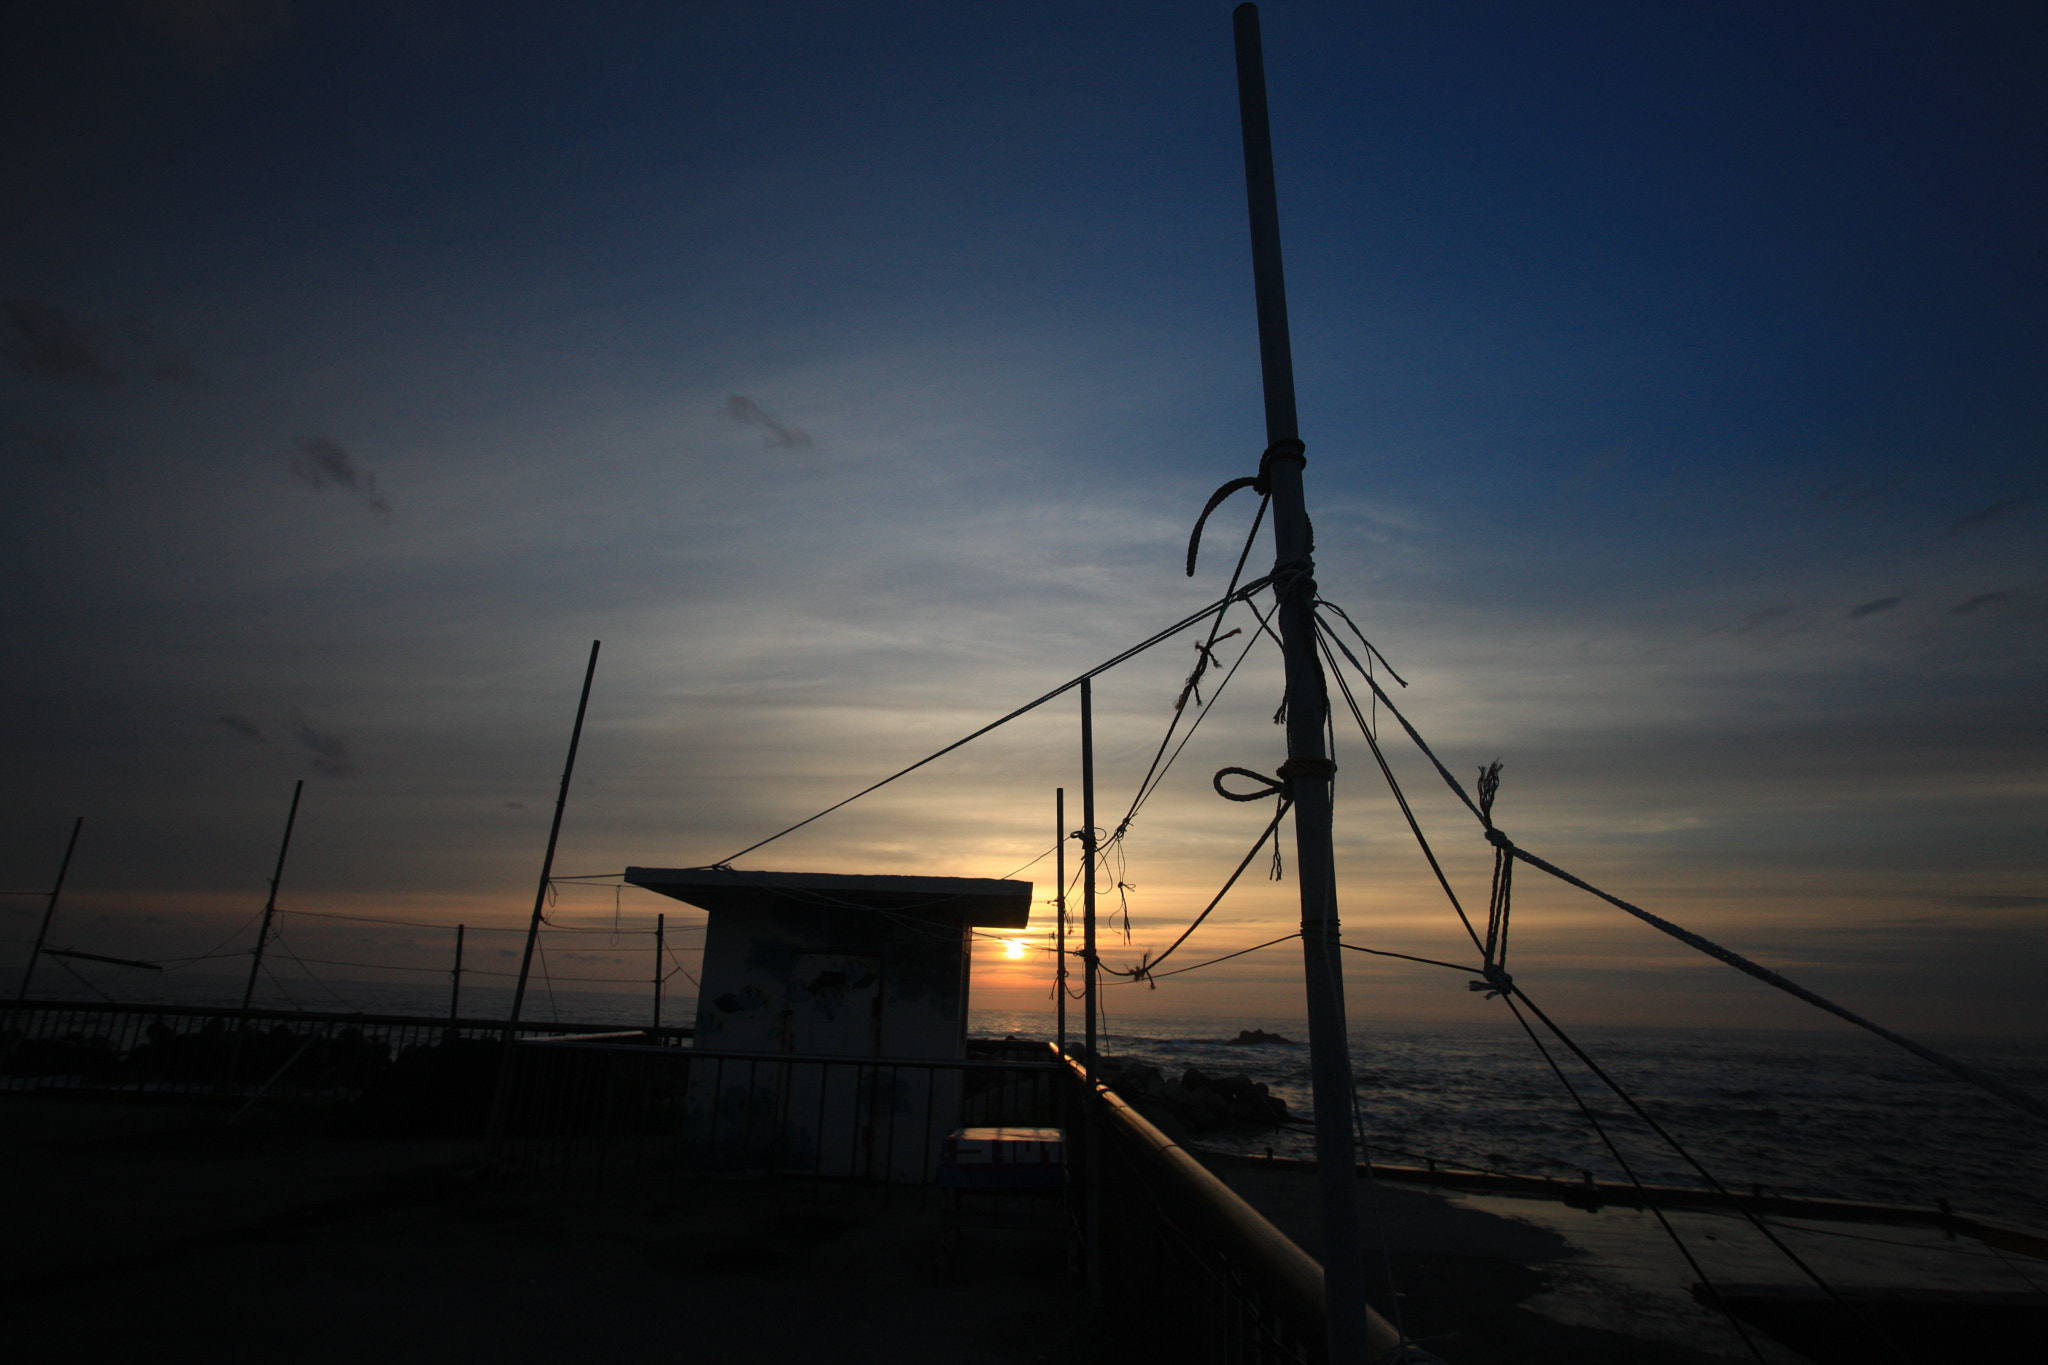 Canon EOS-1Ds Mark III + Sigma 17-35mm f/2.8-4 EX DG Aspherical HSM sample photo. Sunrise with lines @ jumunjin photography